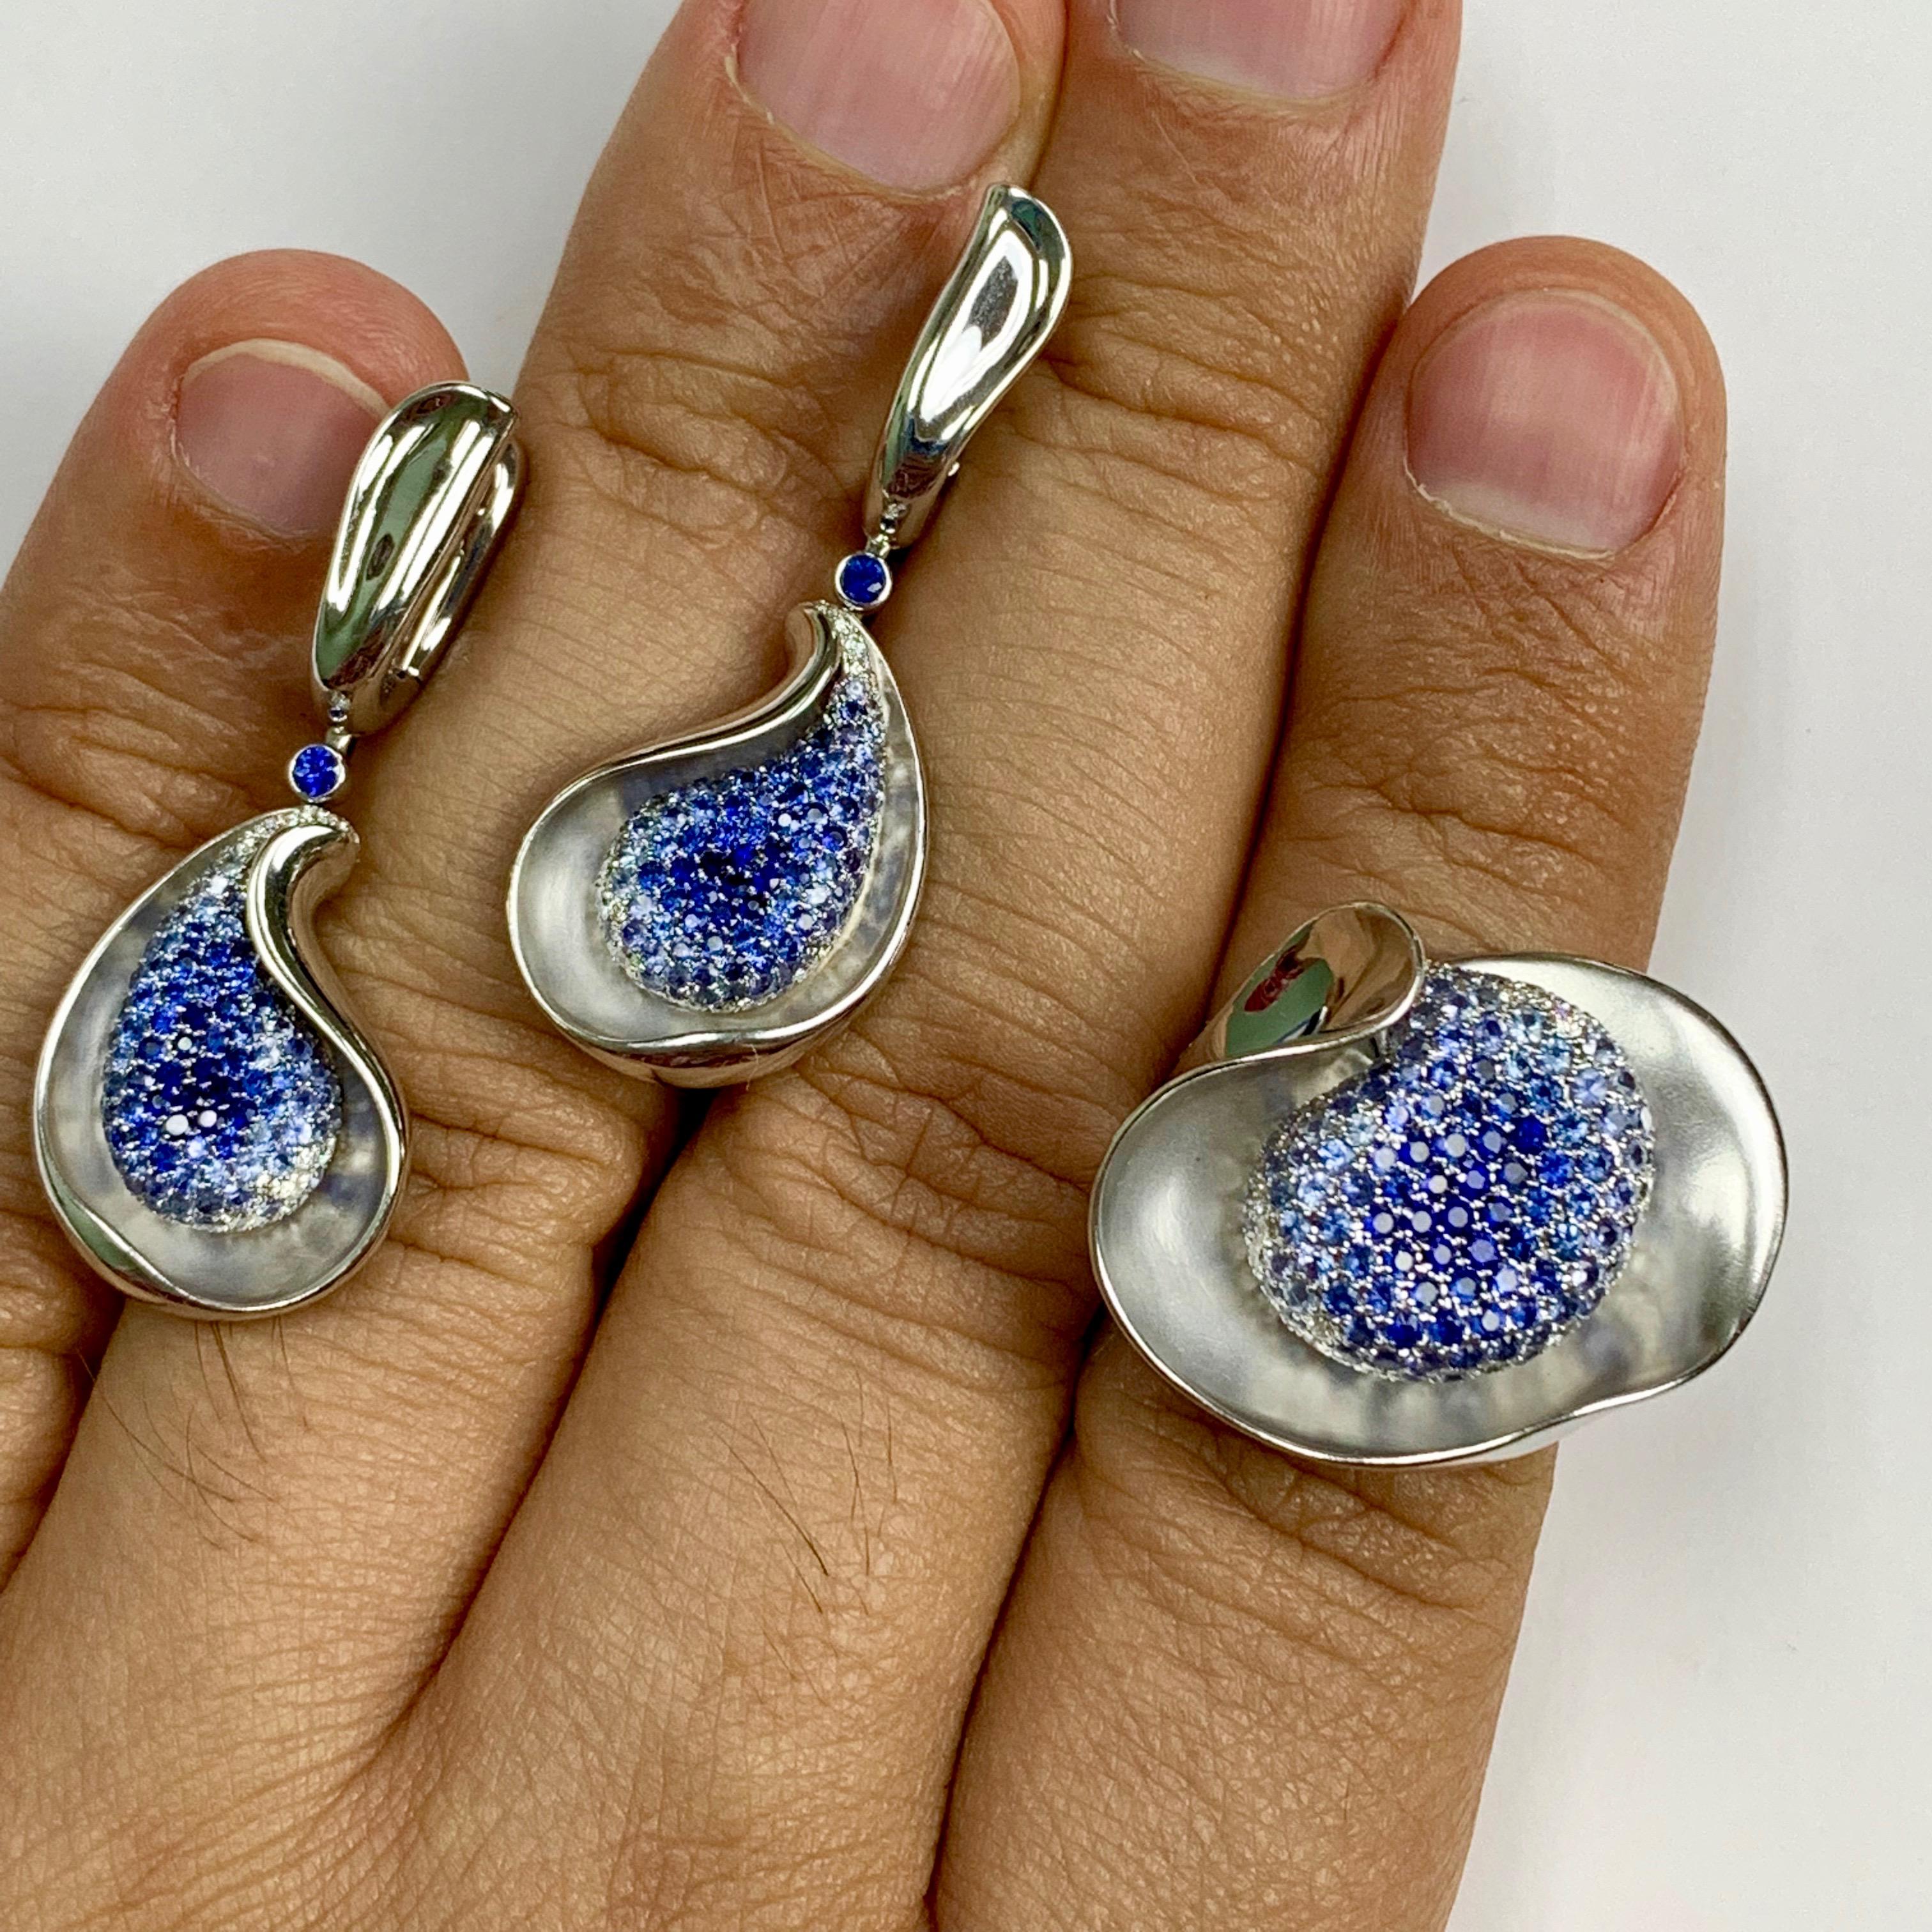 Diamond Blue Sapphire 18 Karat White Gold Ring Earrings Suite

Have you ever see how the Moonlight plays on water? Our designers cath this moment in this Beautiful Ring. The graduation of Diamonds and Blue Sapphires gives full impression of the